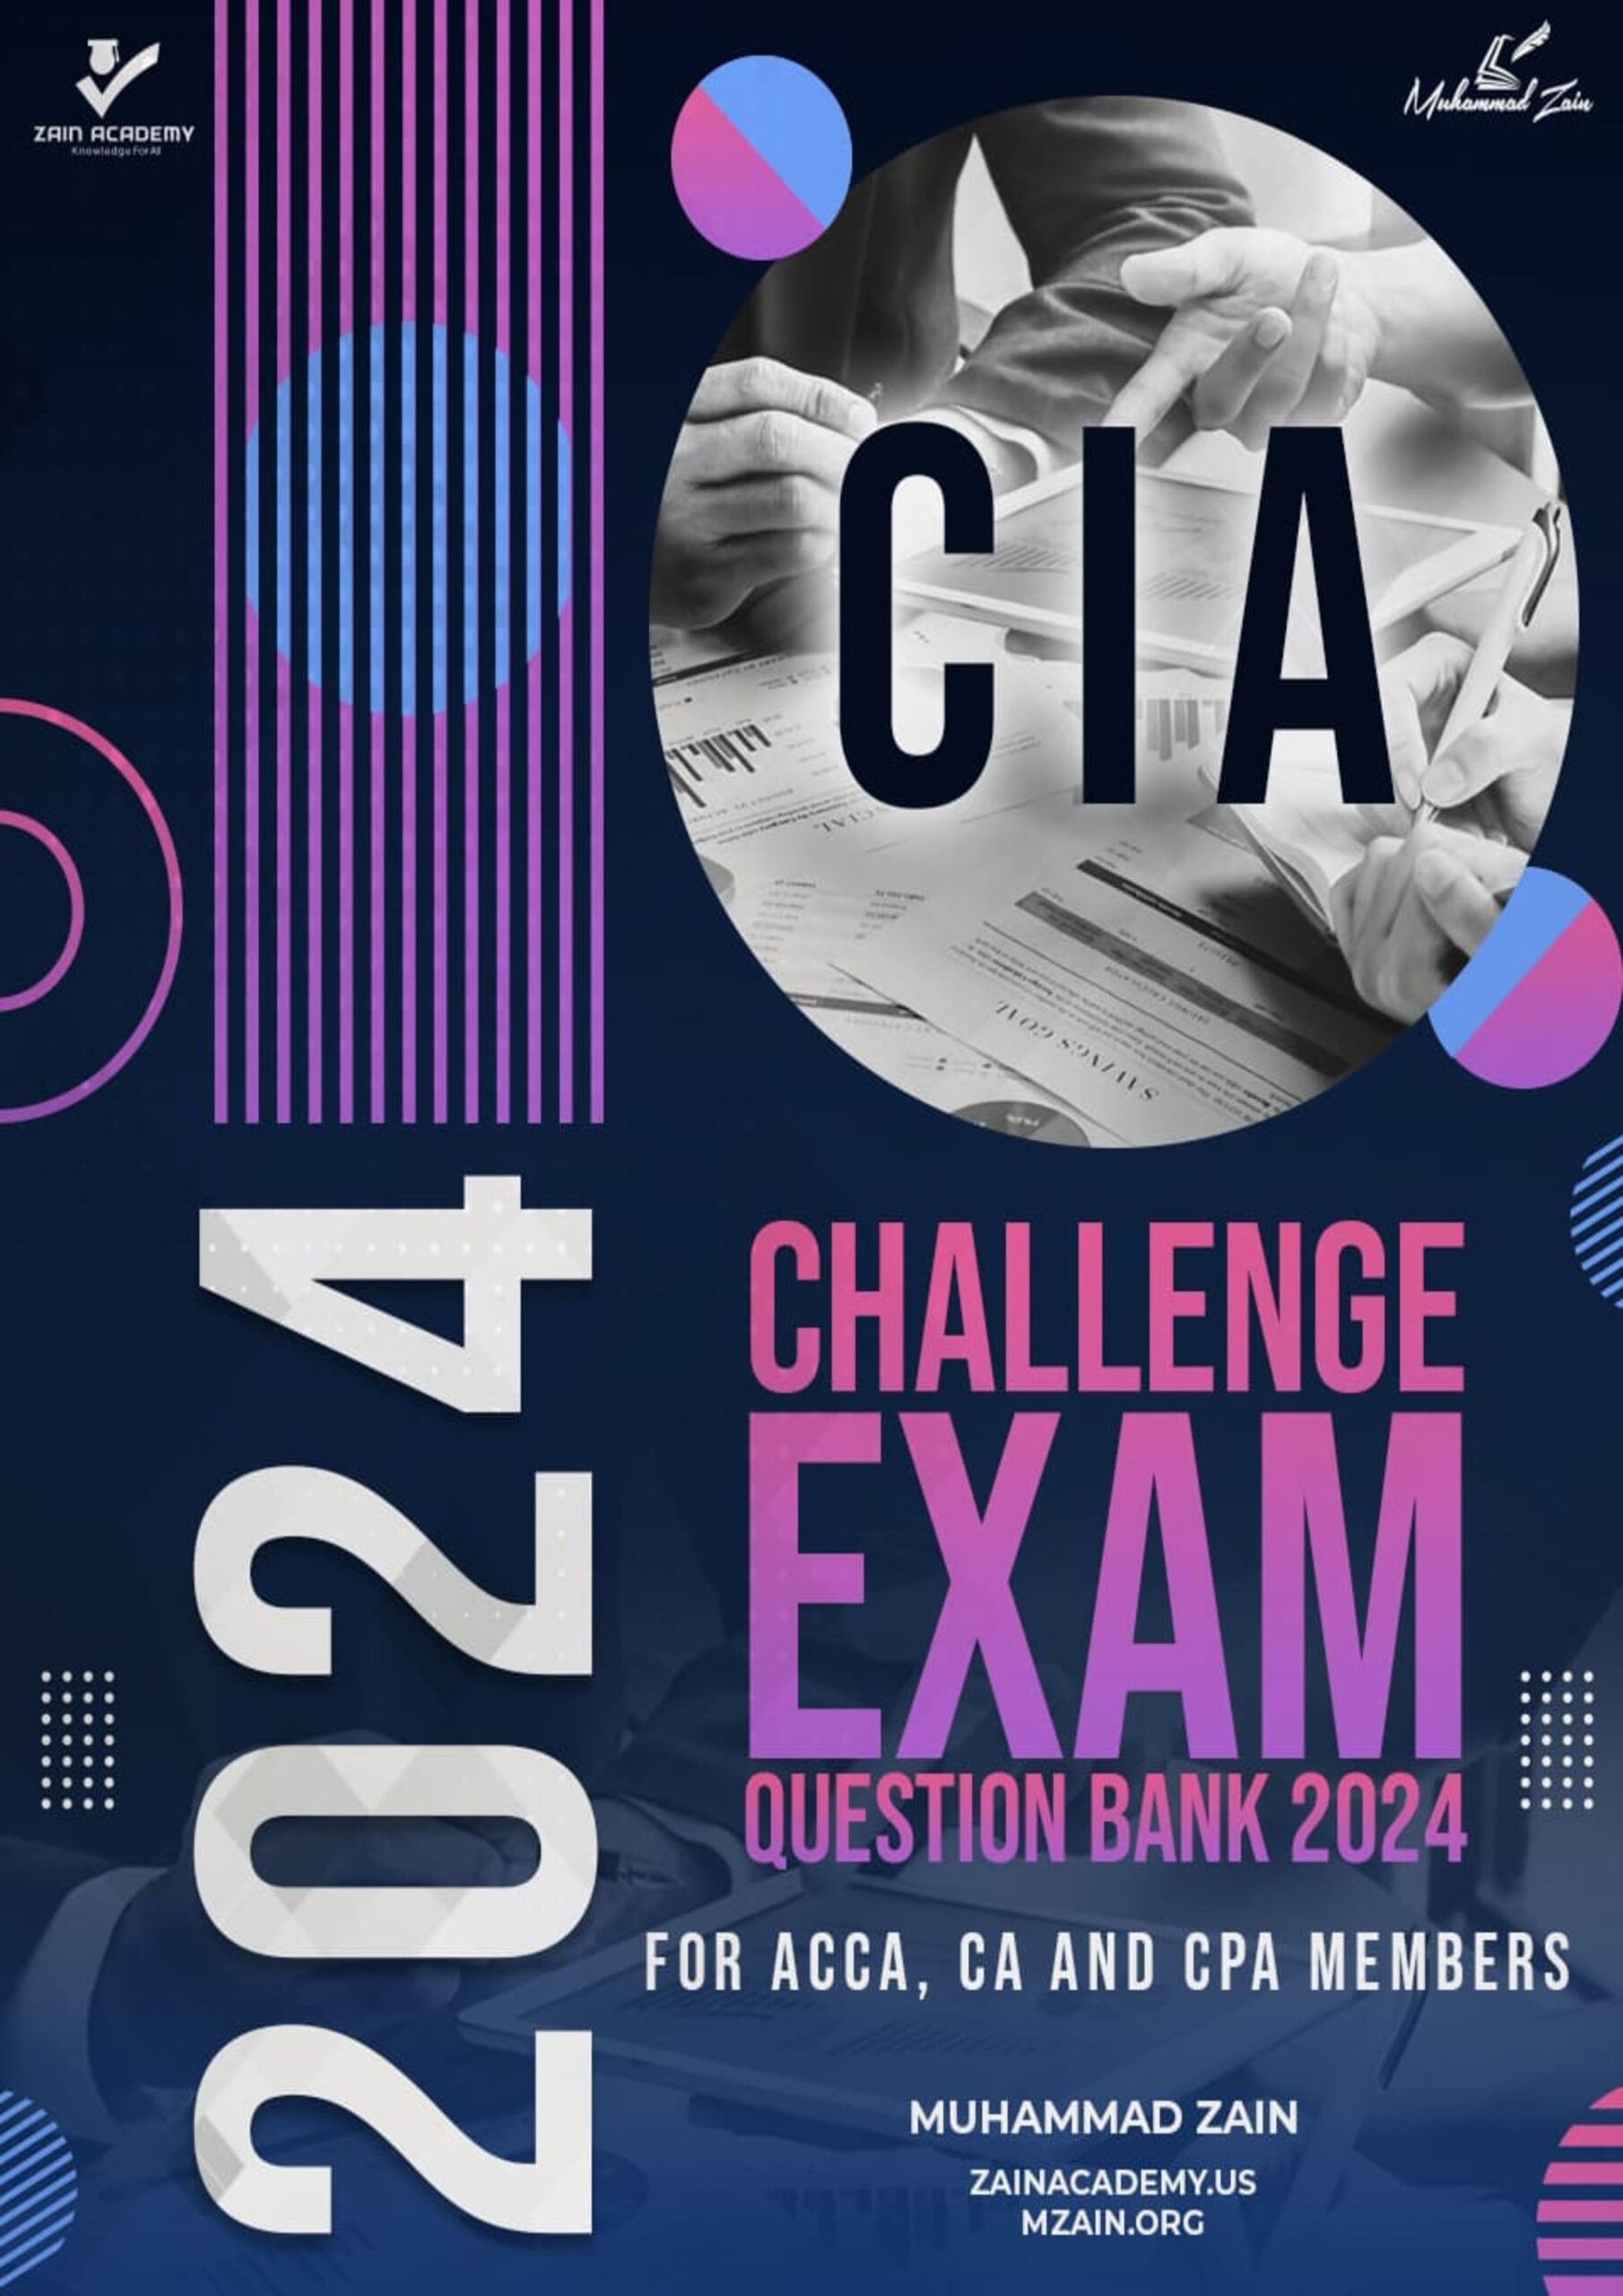 cia challenge exam question bank 2024